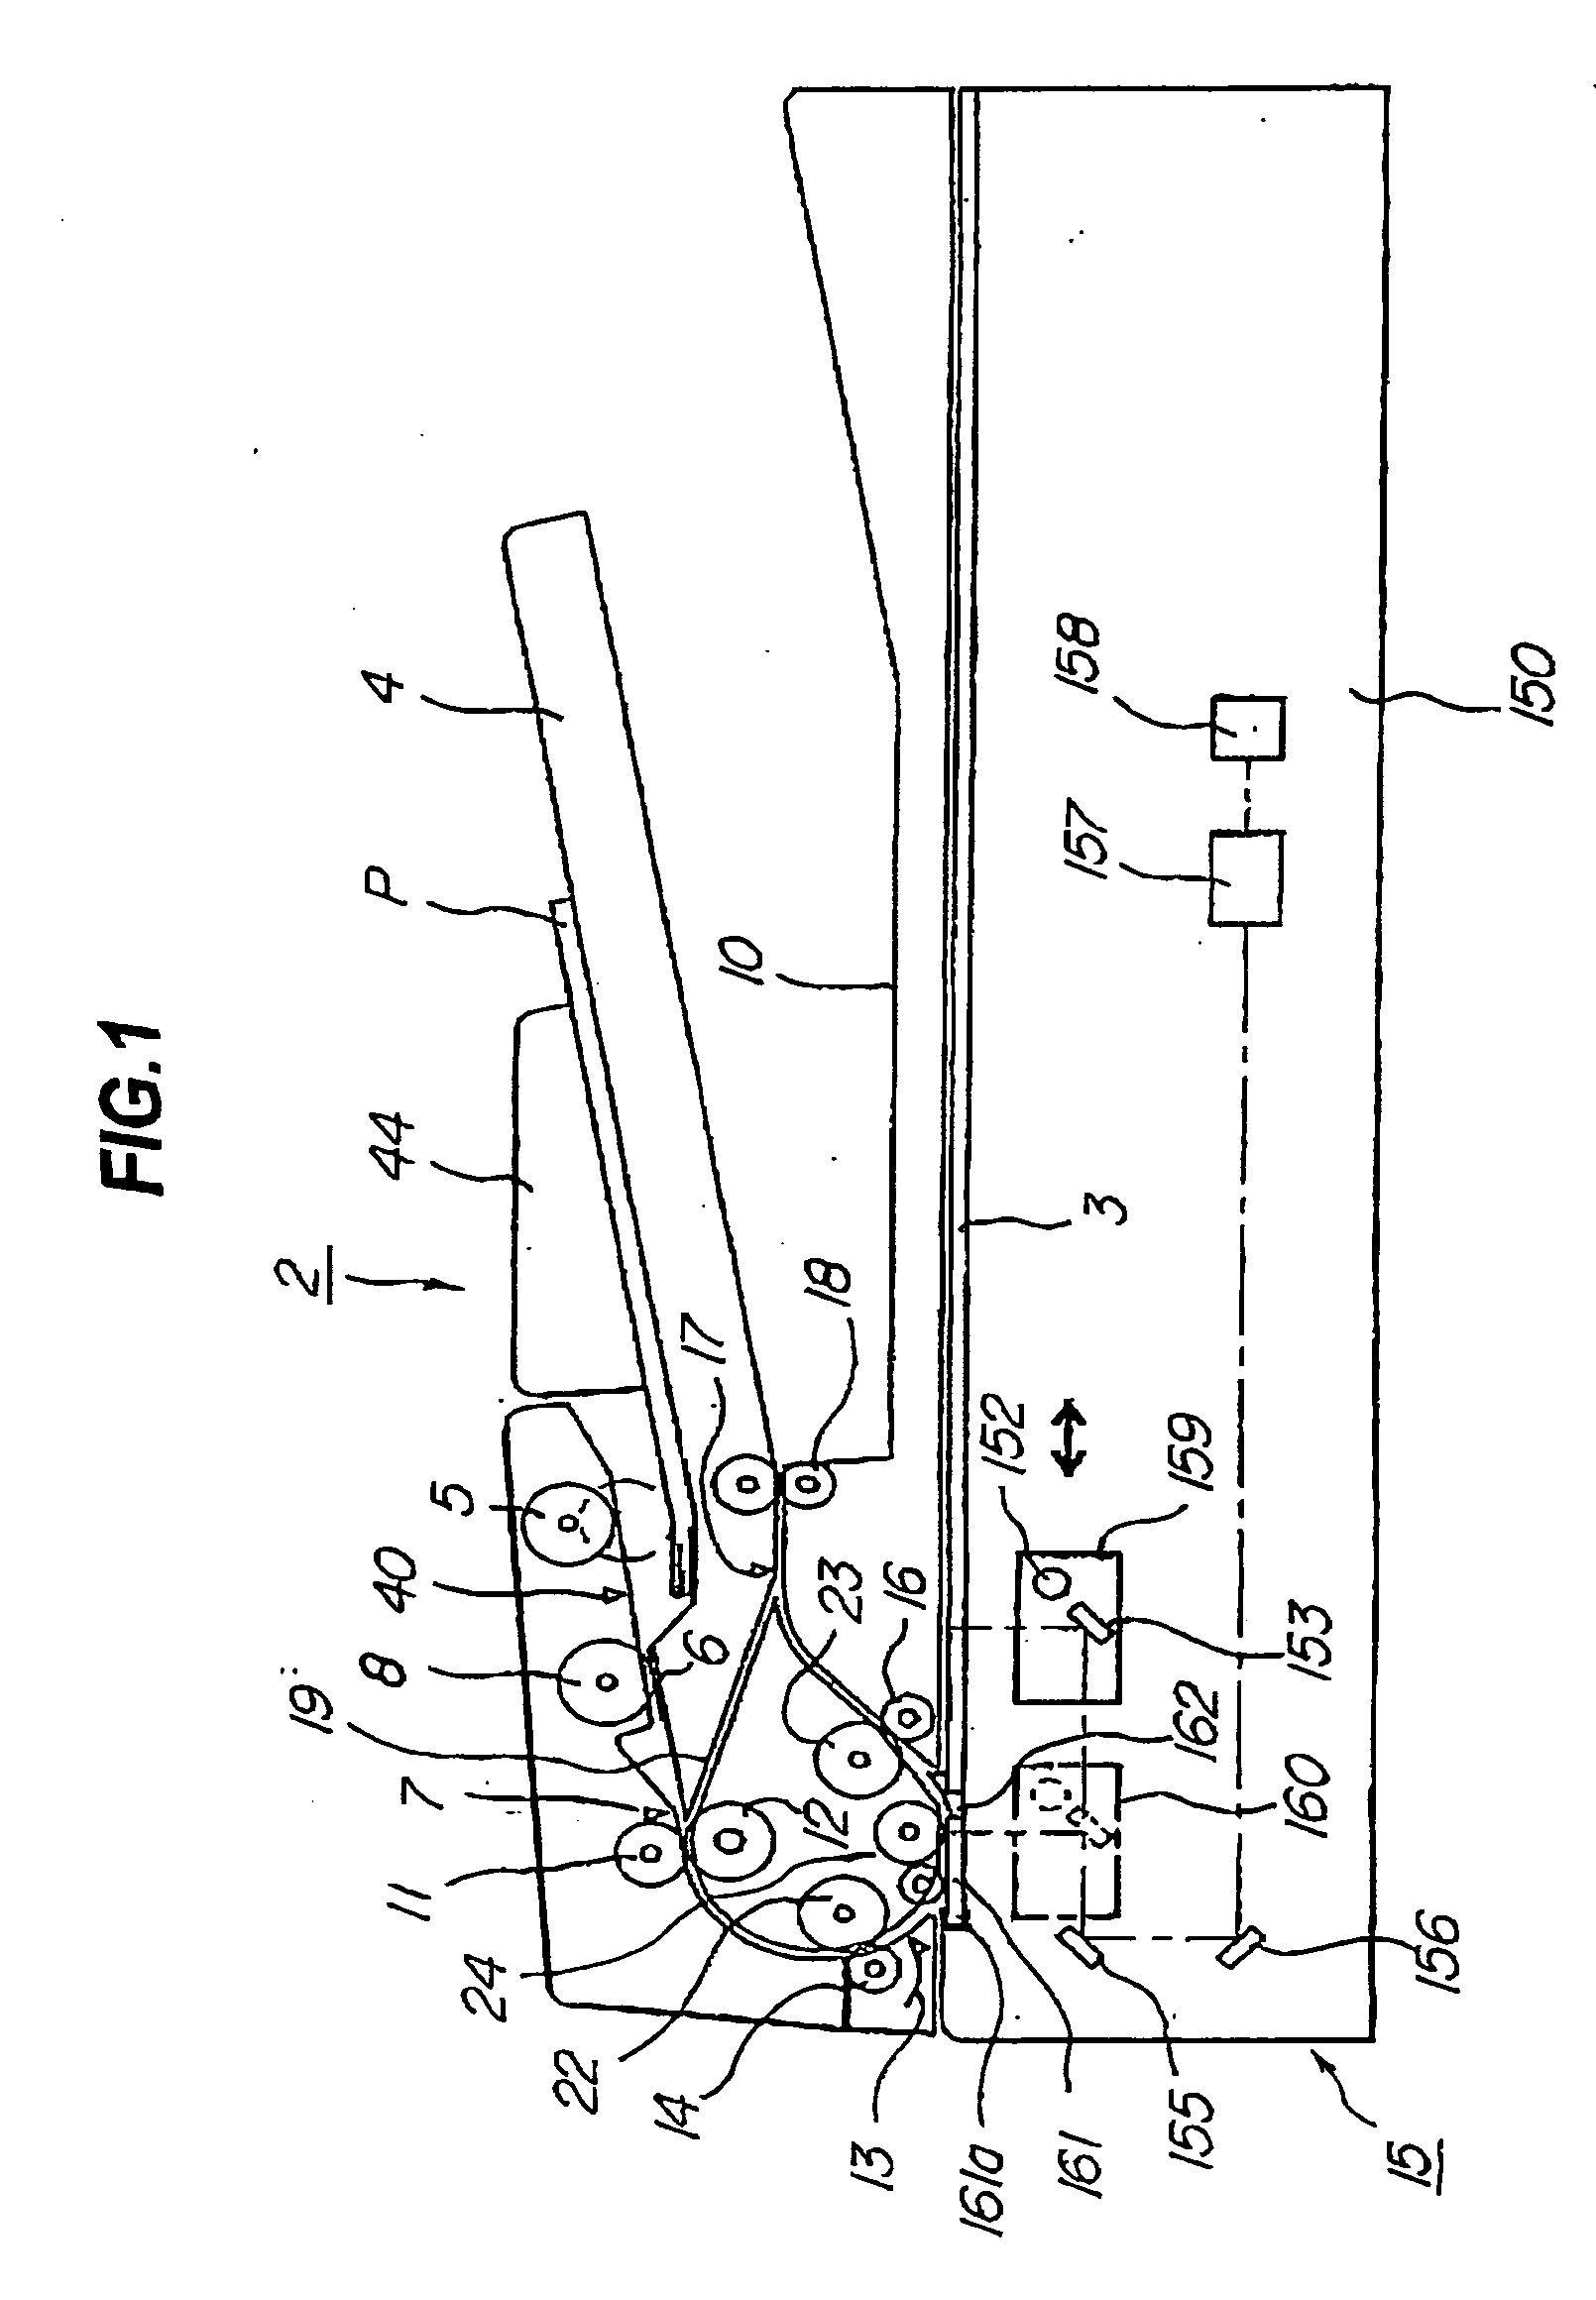 Image reading unit and image forming apparatus comprising the same